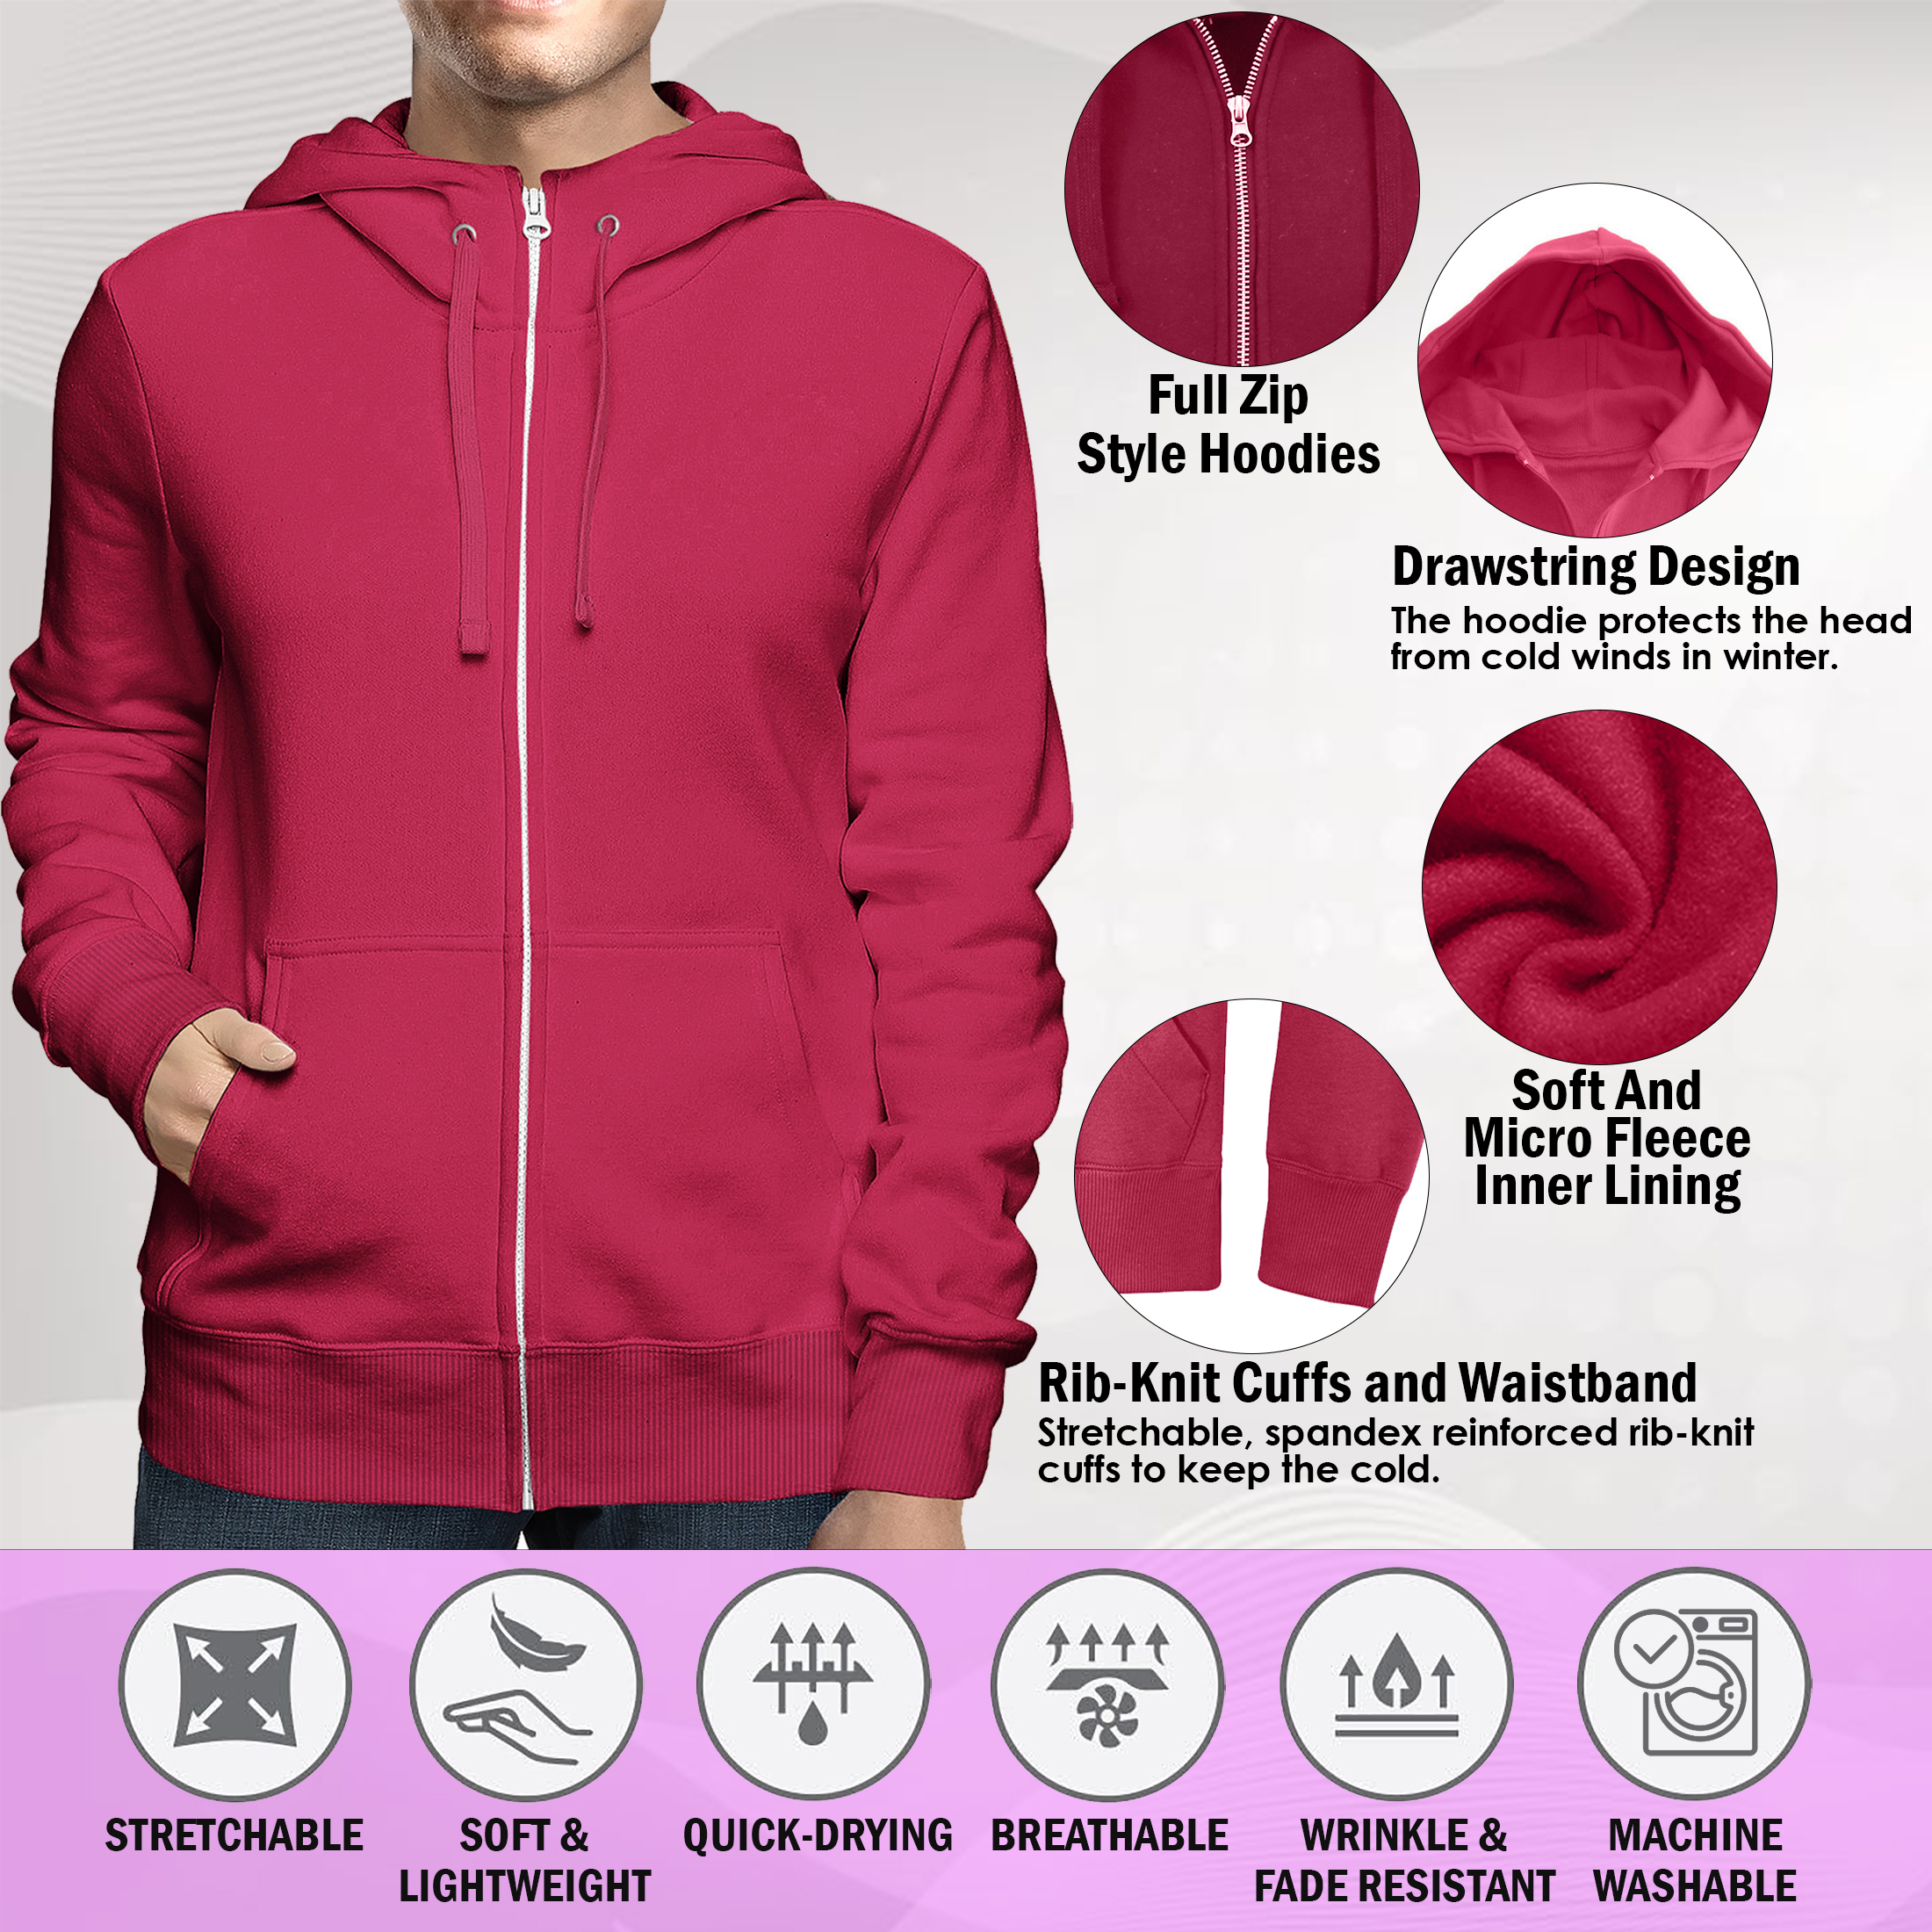 2-Pack: Men's Full Zip Up Fleece-Lined Hoodie Sweatshirt (Big & Tall Size Available) - Burgundy & Timberland, Large